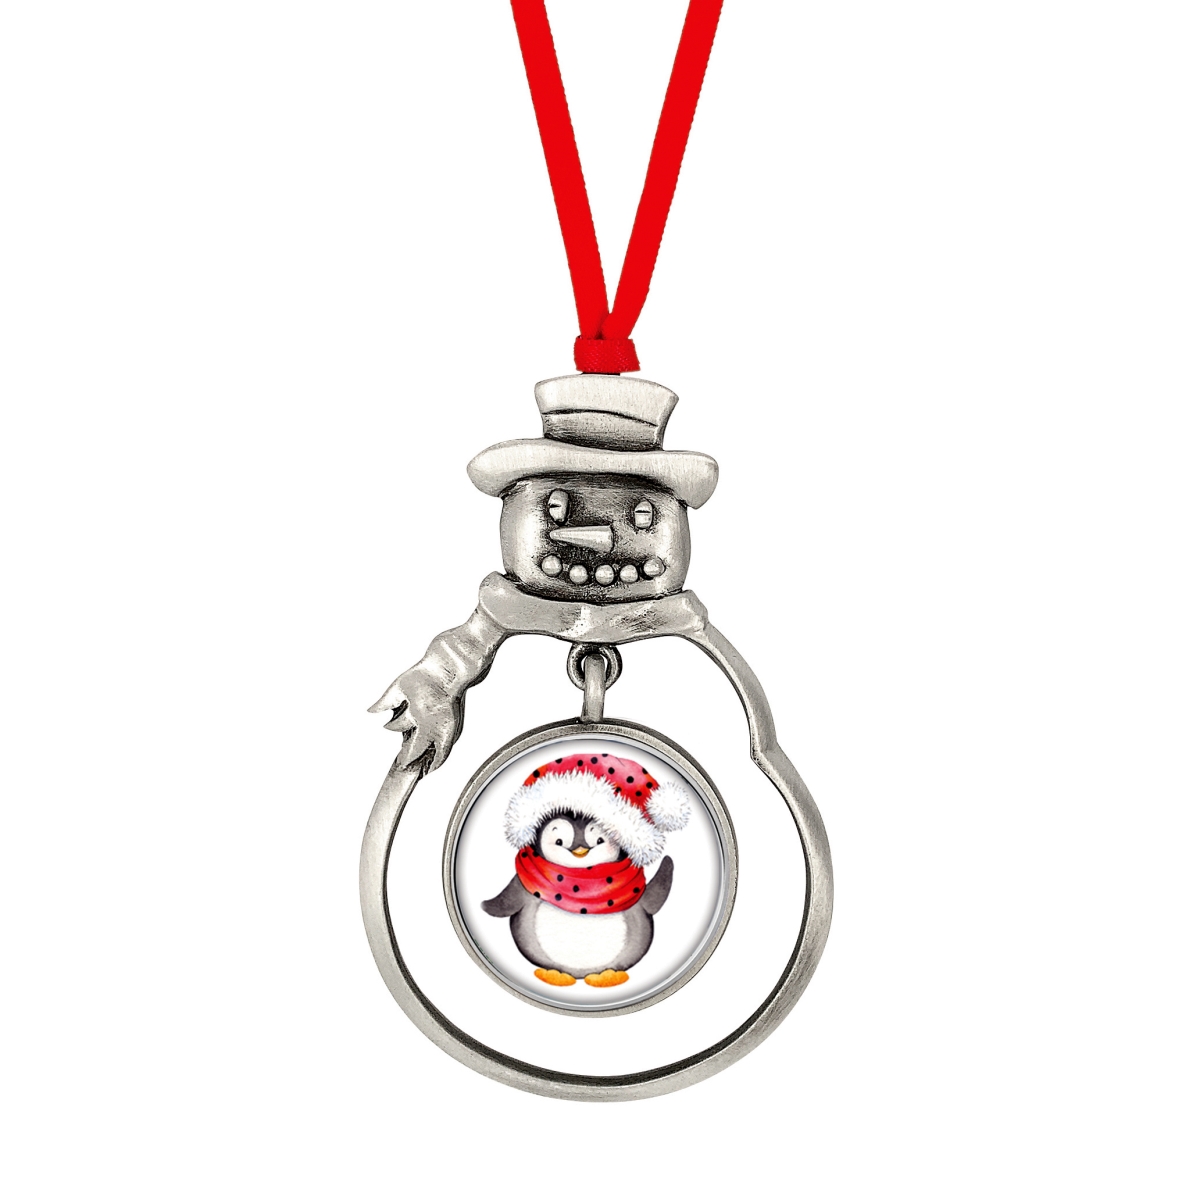 Picture of American Coin Treasures 16623 Snow Man Ornament with Colorized Quarter Penguin Coin